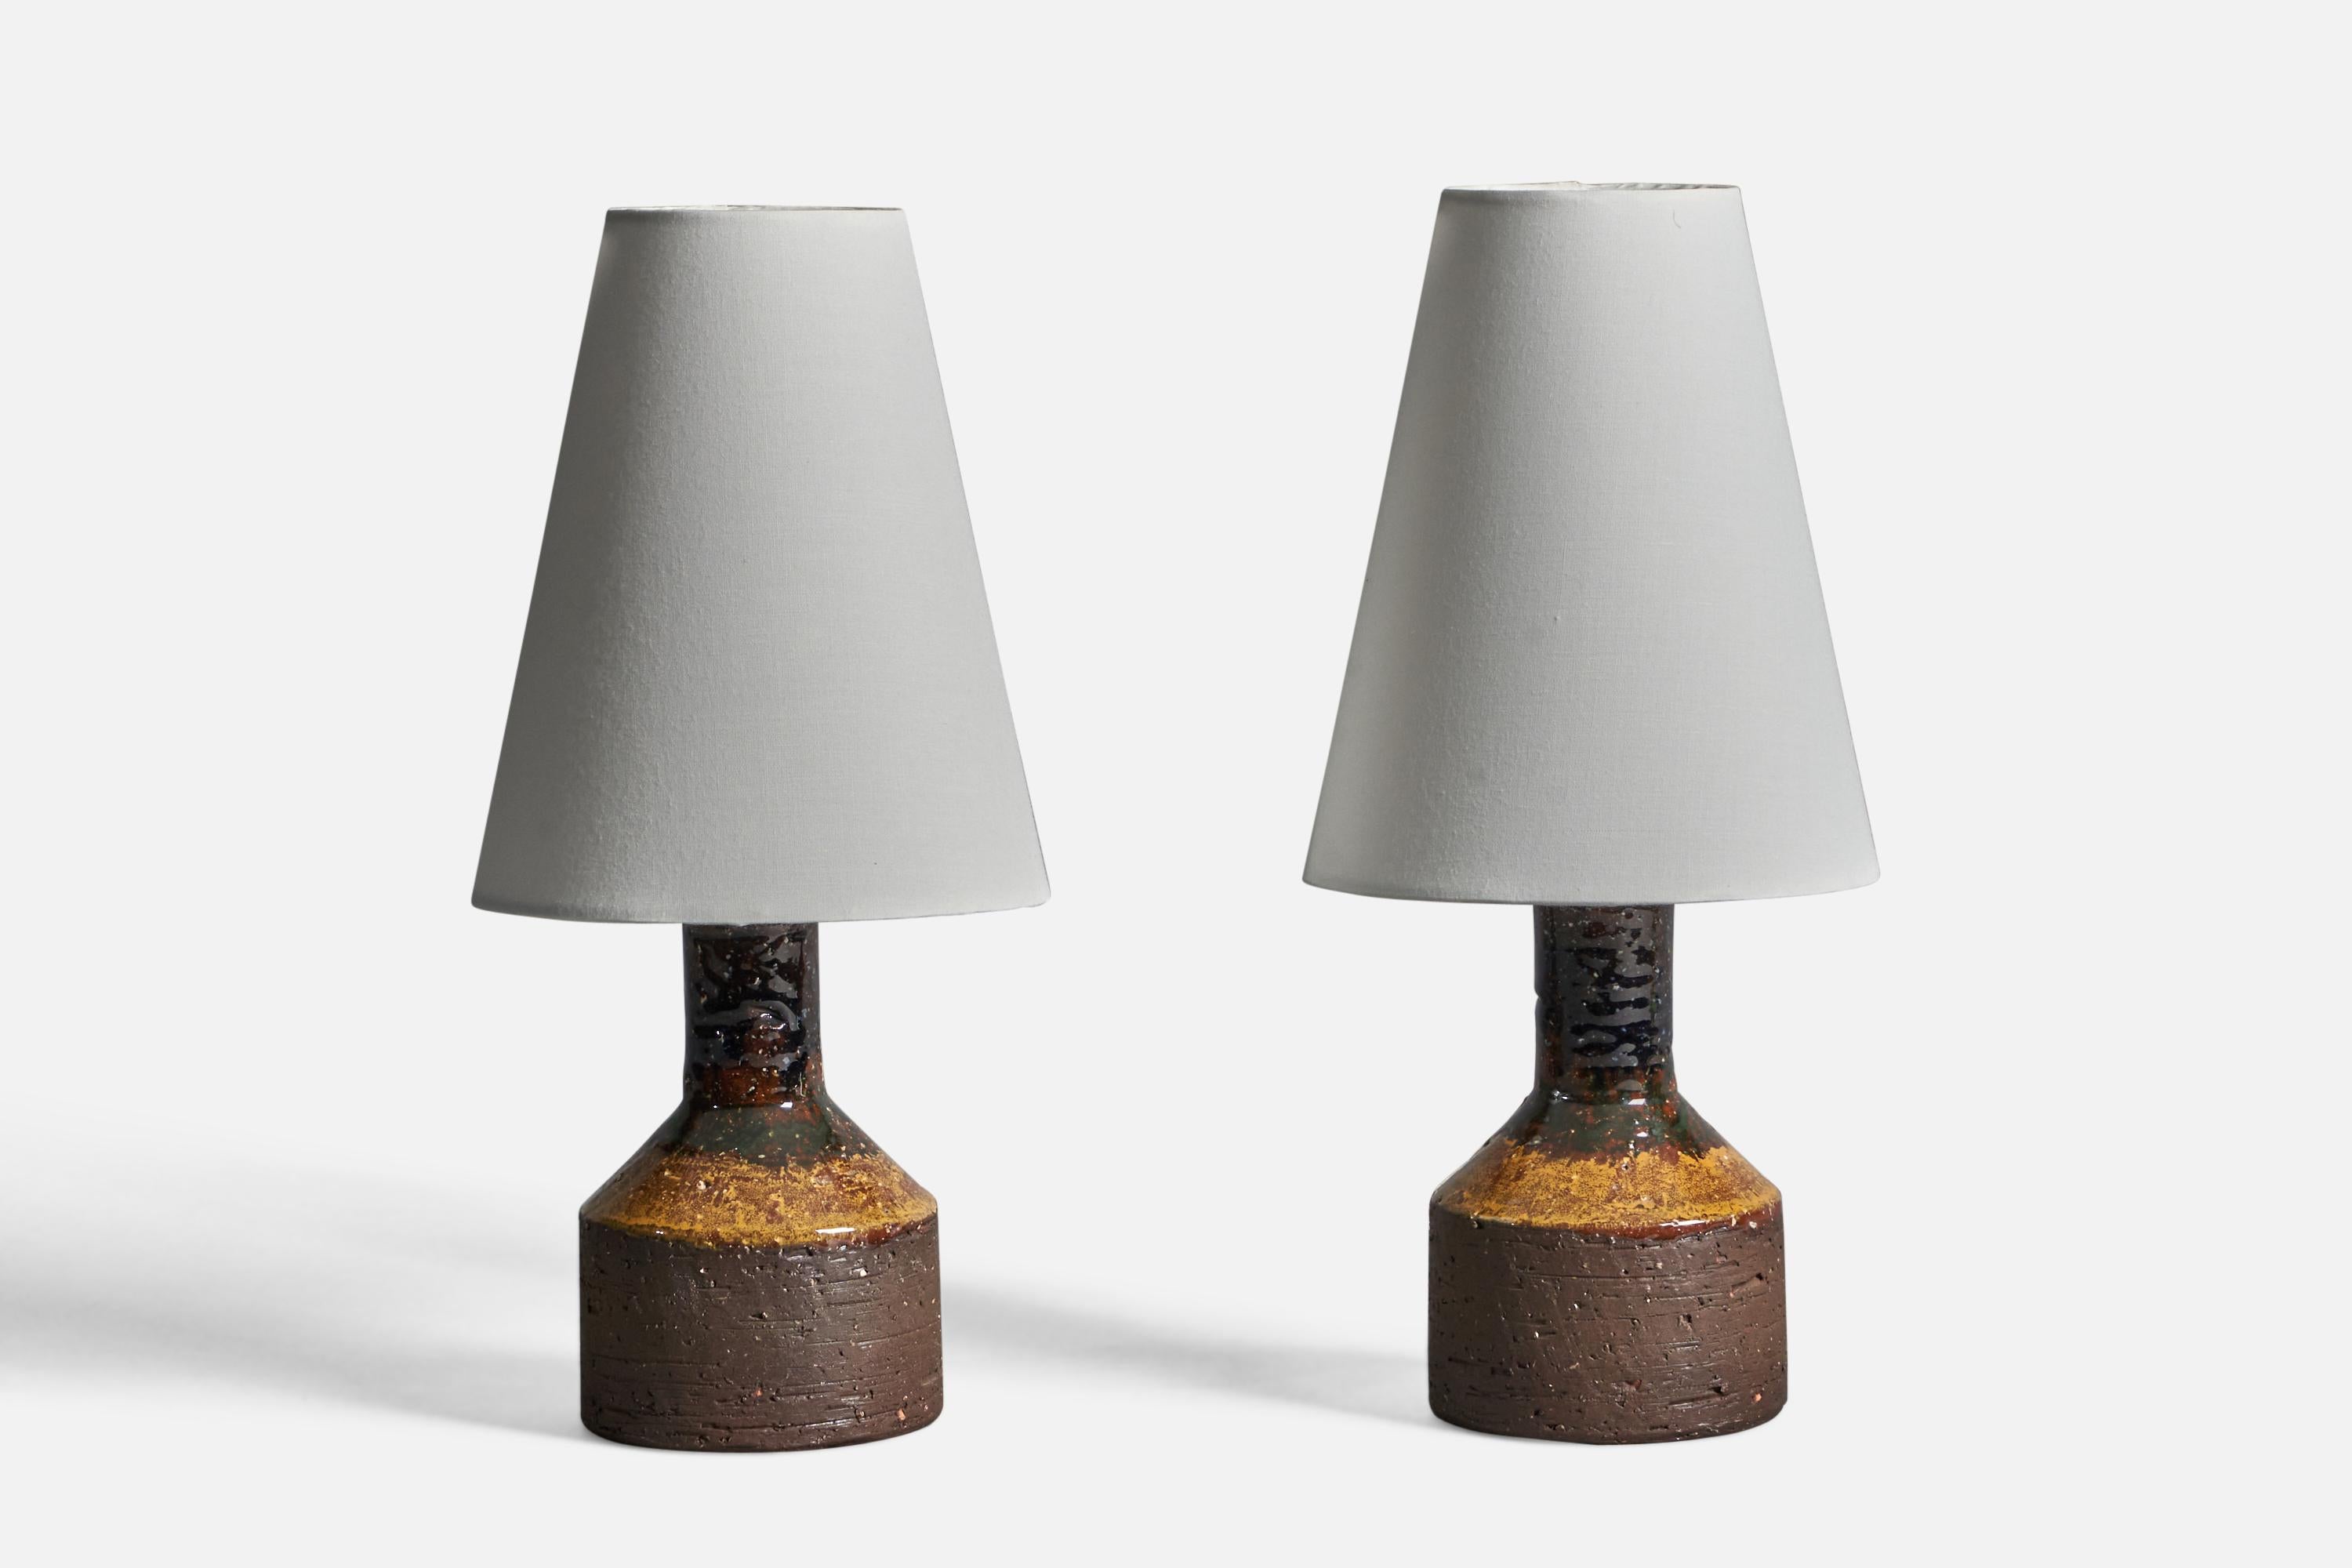 A pair of black and yellow-glazed stoneware table lamps, designed and produced by Laholms Keramik, Sweden, c. 1960s.

Dimensions of Lamp (inches): 7.5